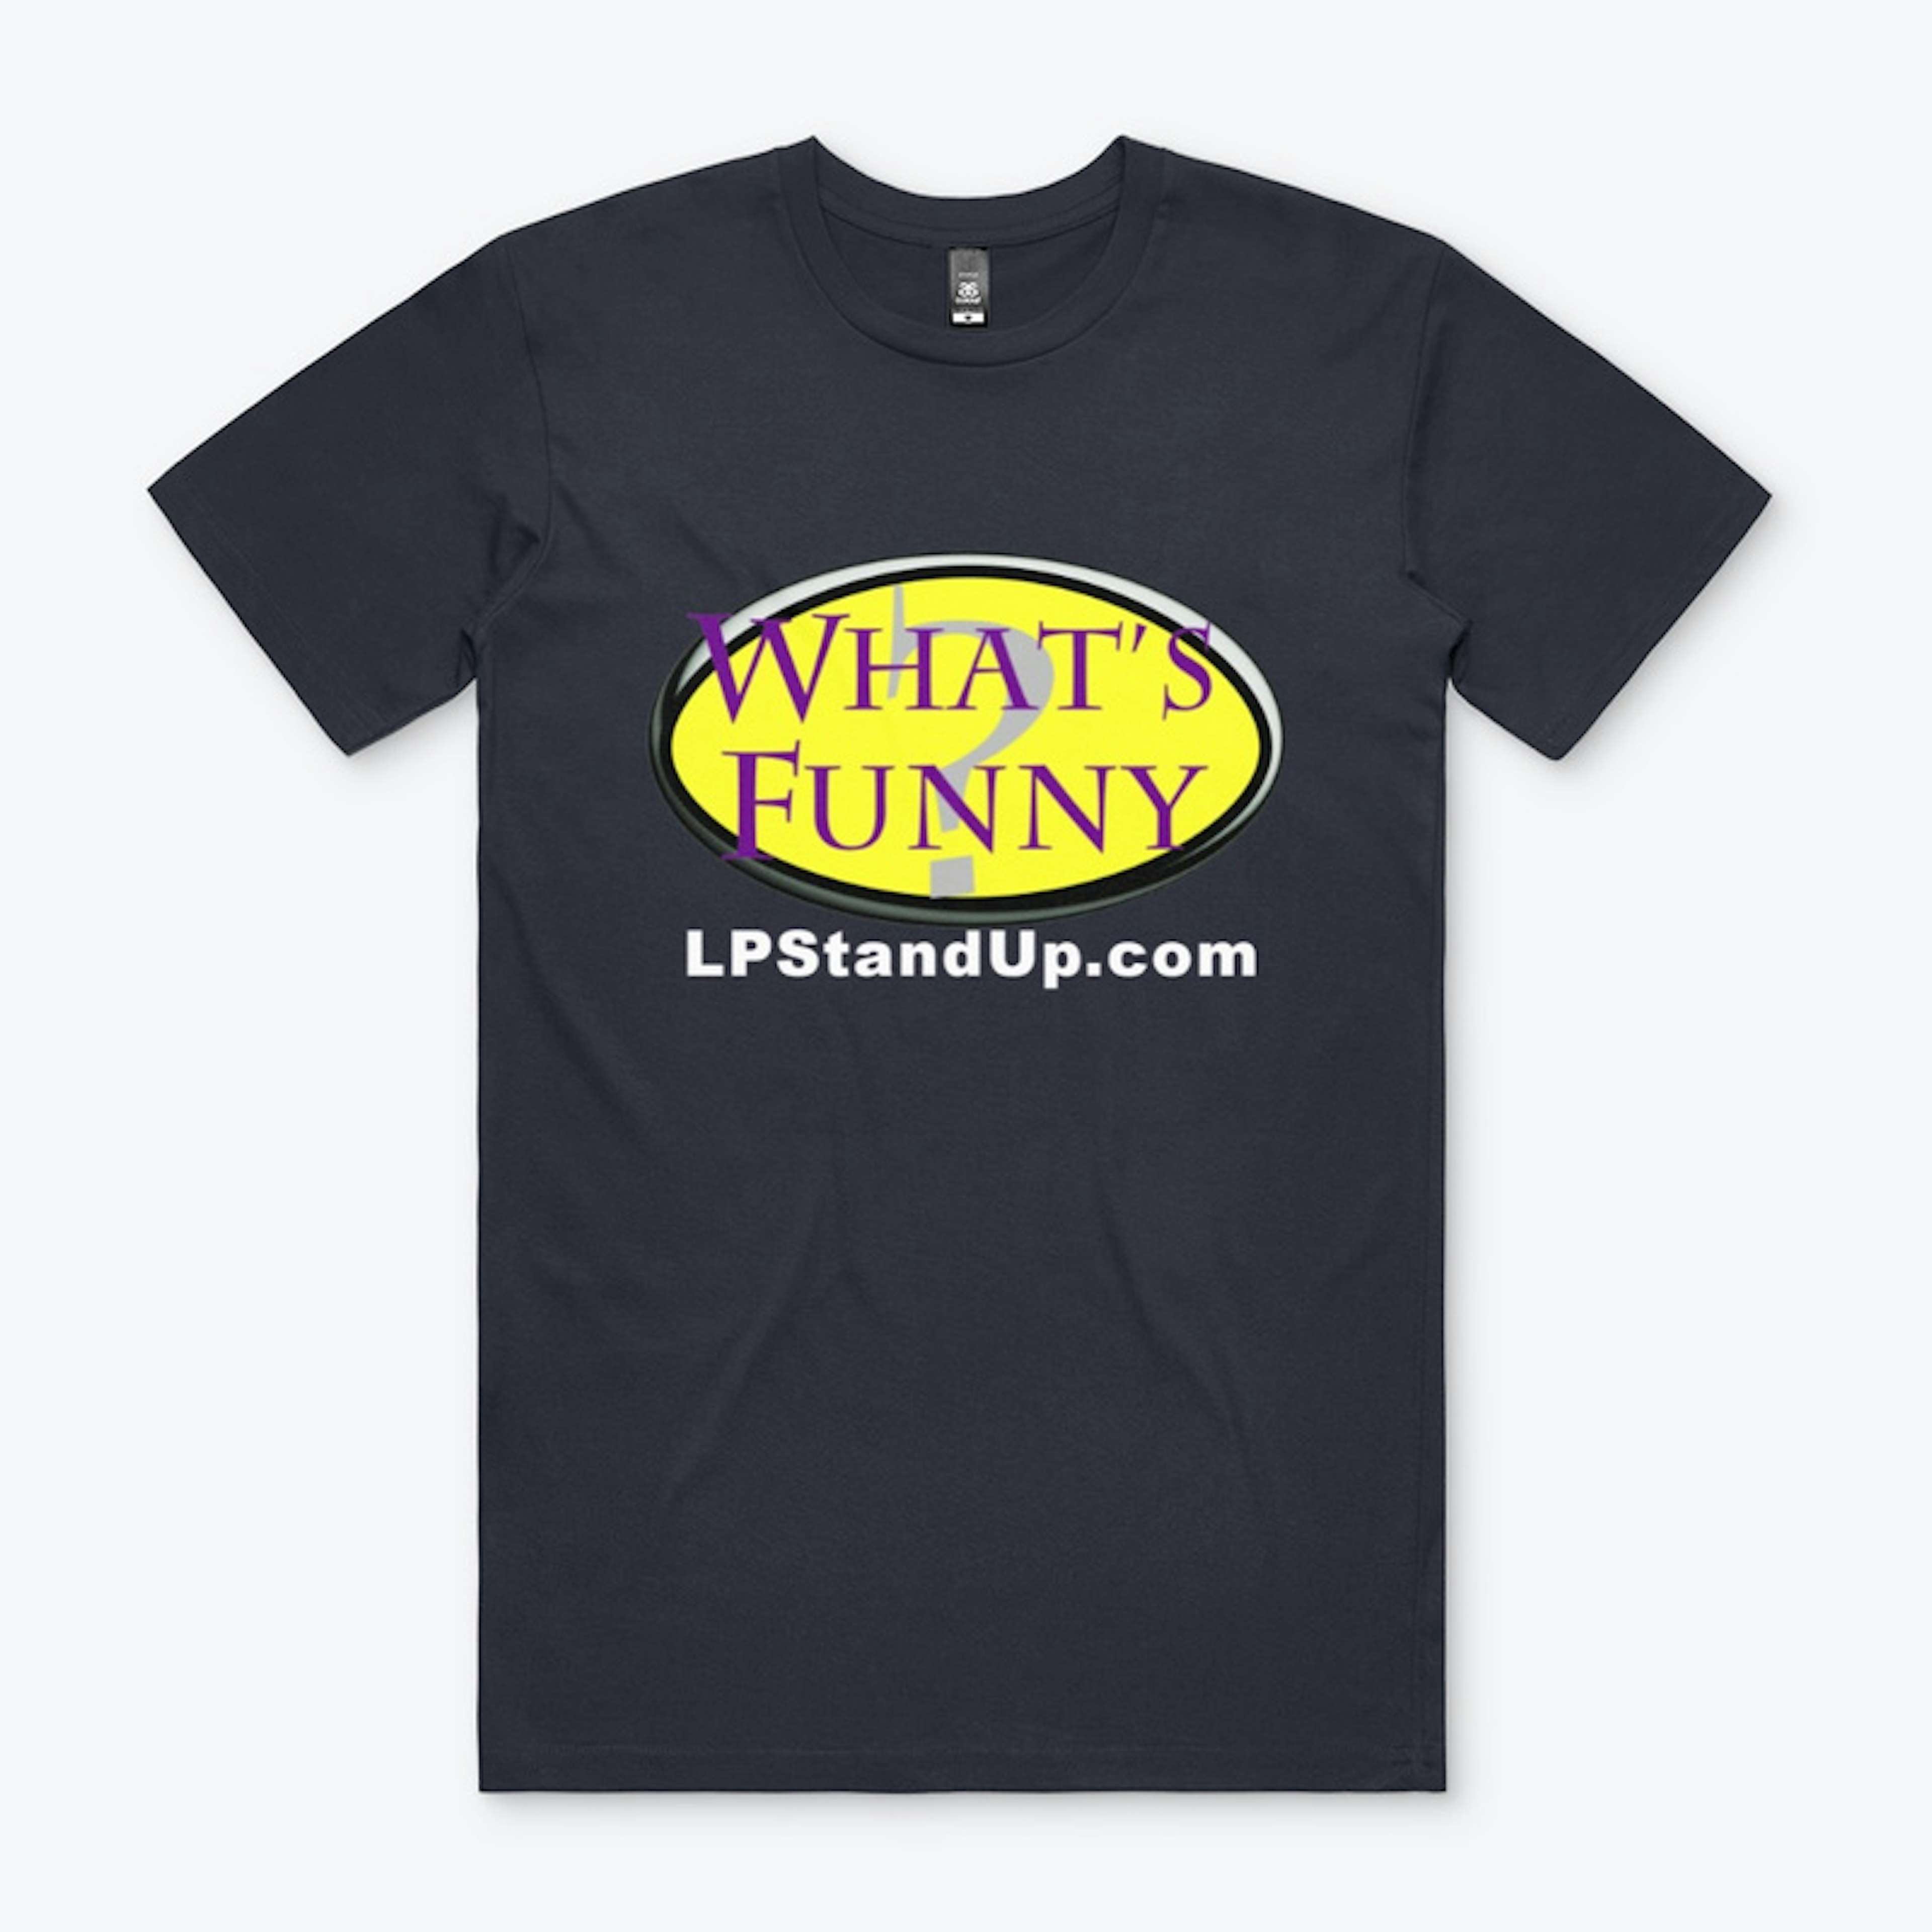 LP's "What's Funny?" 